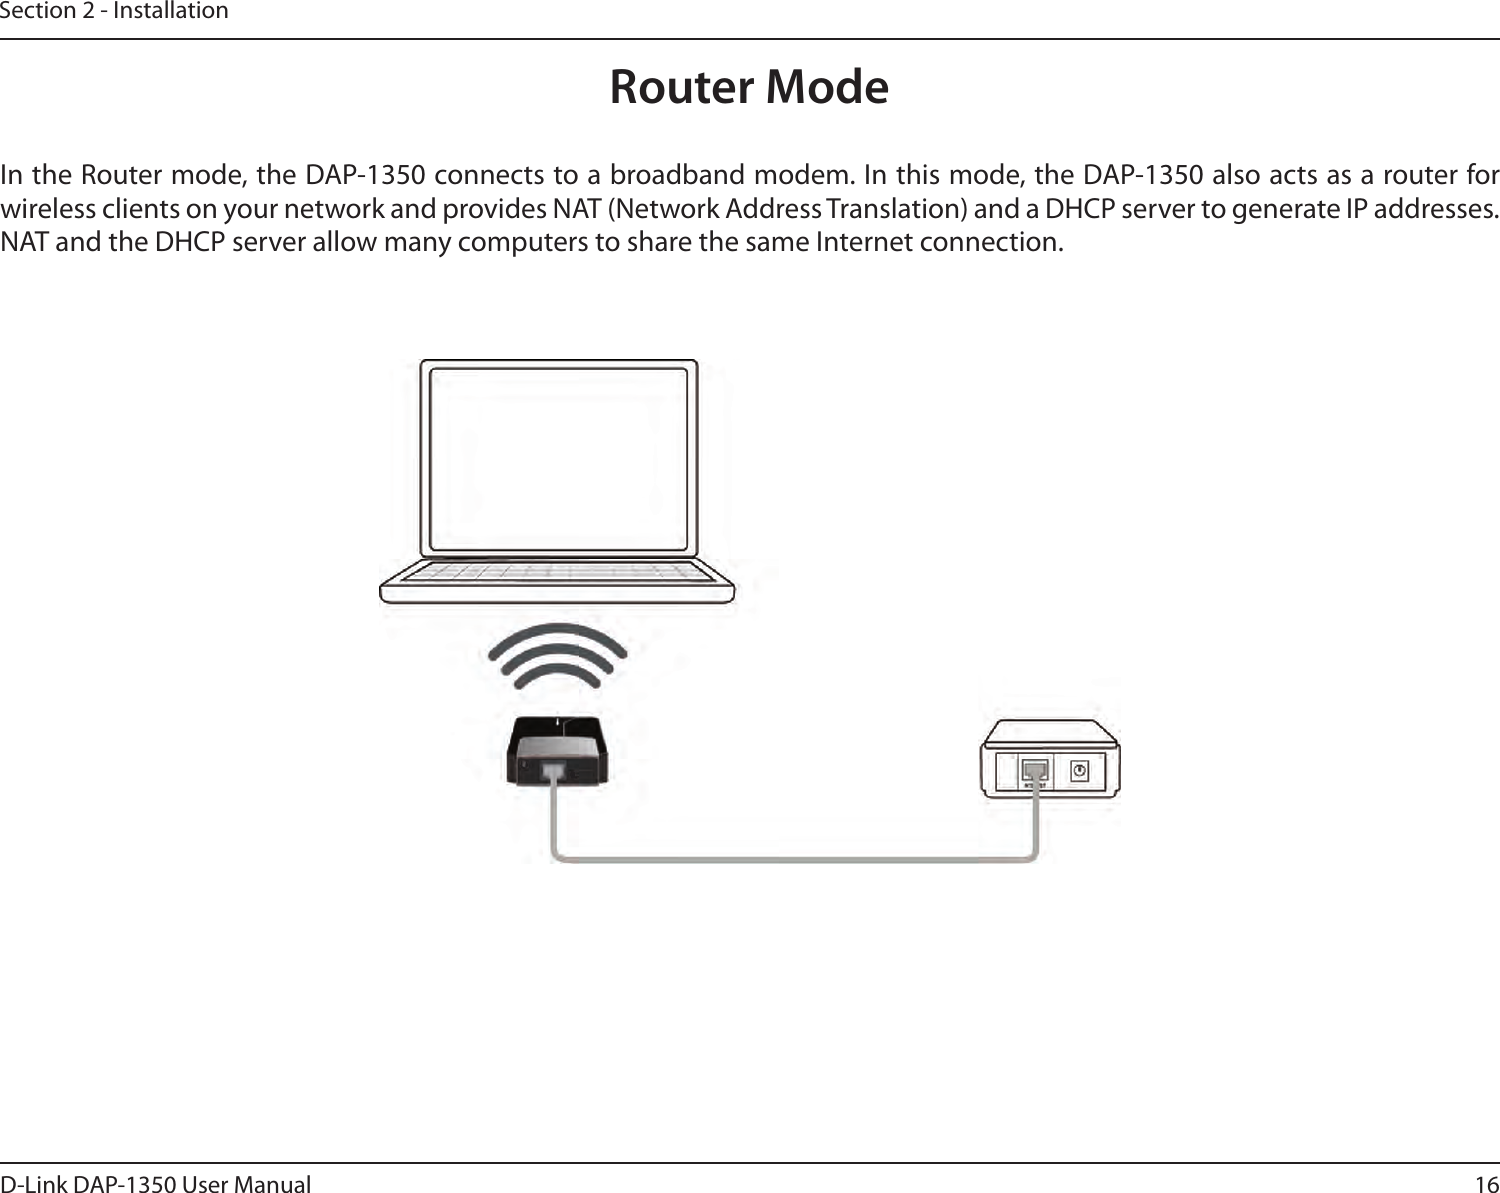 16D-Link DAP-1350 User ManualSection 2 - InstallationRouter ModeIn the Router mode, the DAP-1350 connects to a broadband modem. In this mode, the DAP-1350 also acts as a router for wireless clients on your network and provides NAT (Network Address Translation) and a DHCP server to generate IP addresses. NAT and the DHCP server allow many computers to share the same Internet connection.